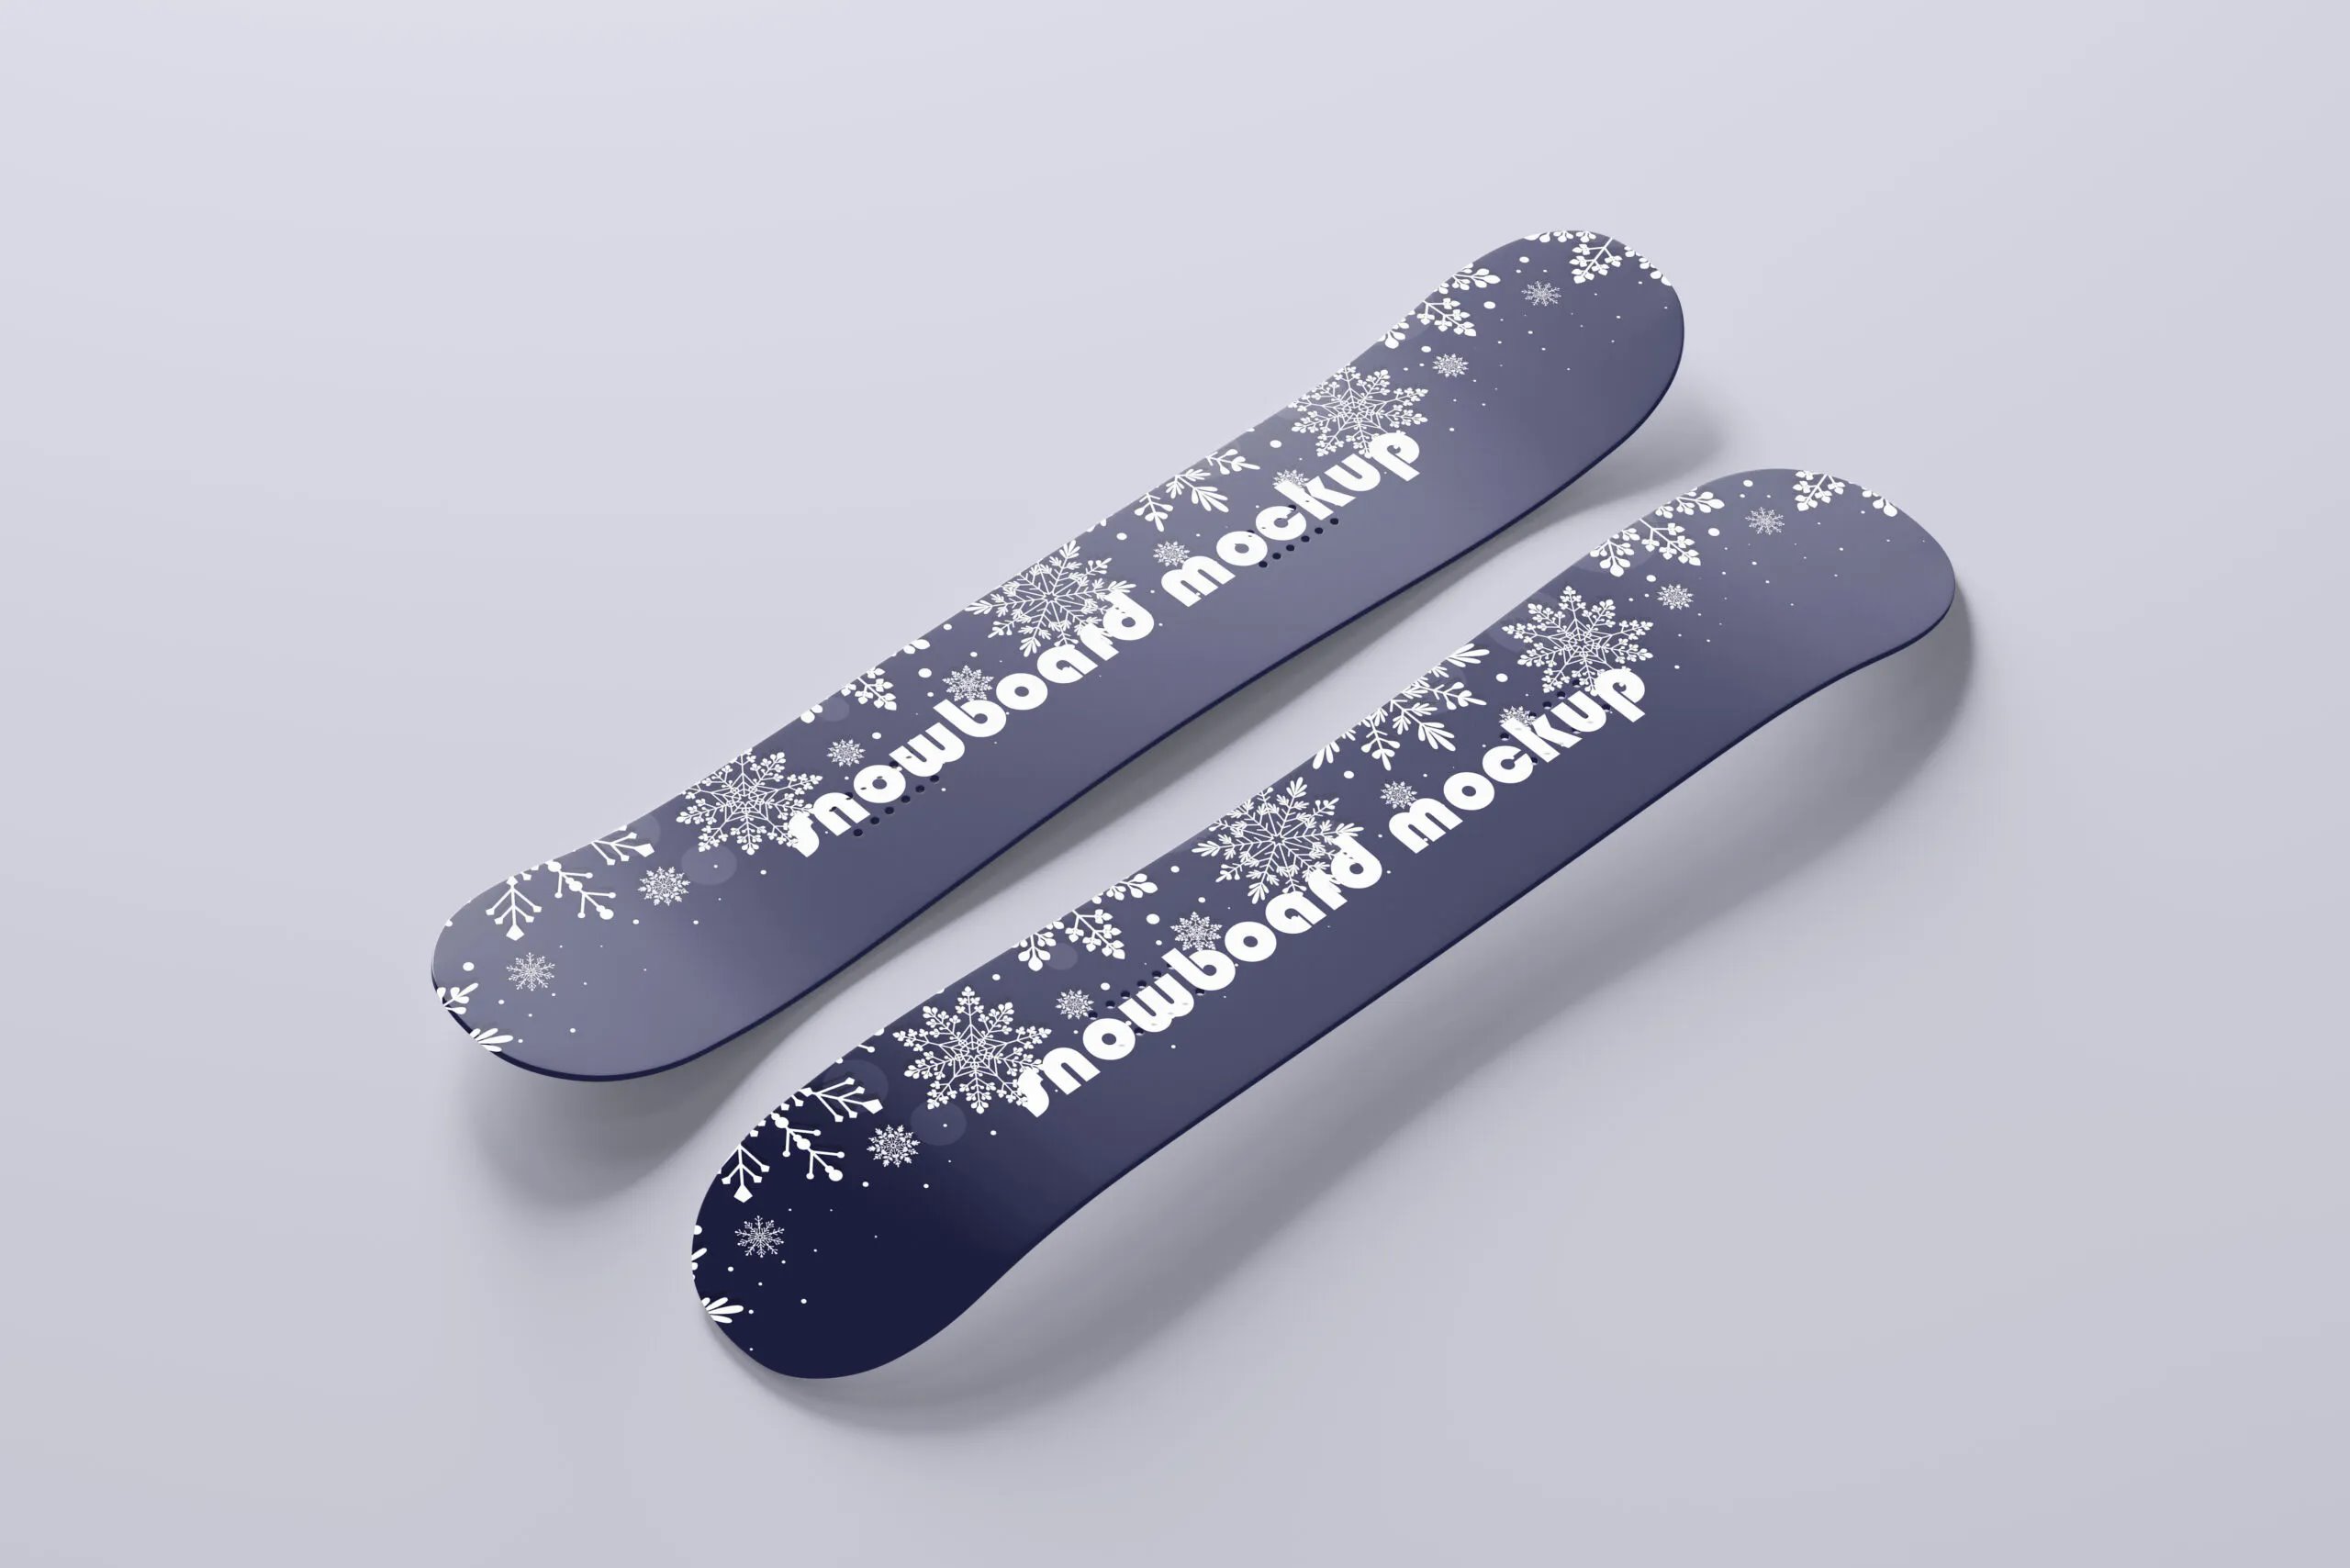 10 Snowboards Mockups in Different Sights FREE PSD